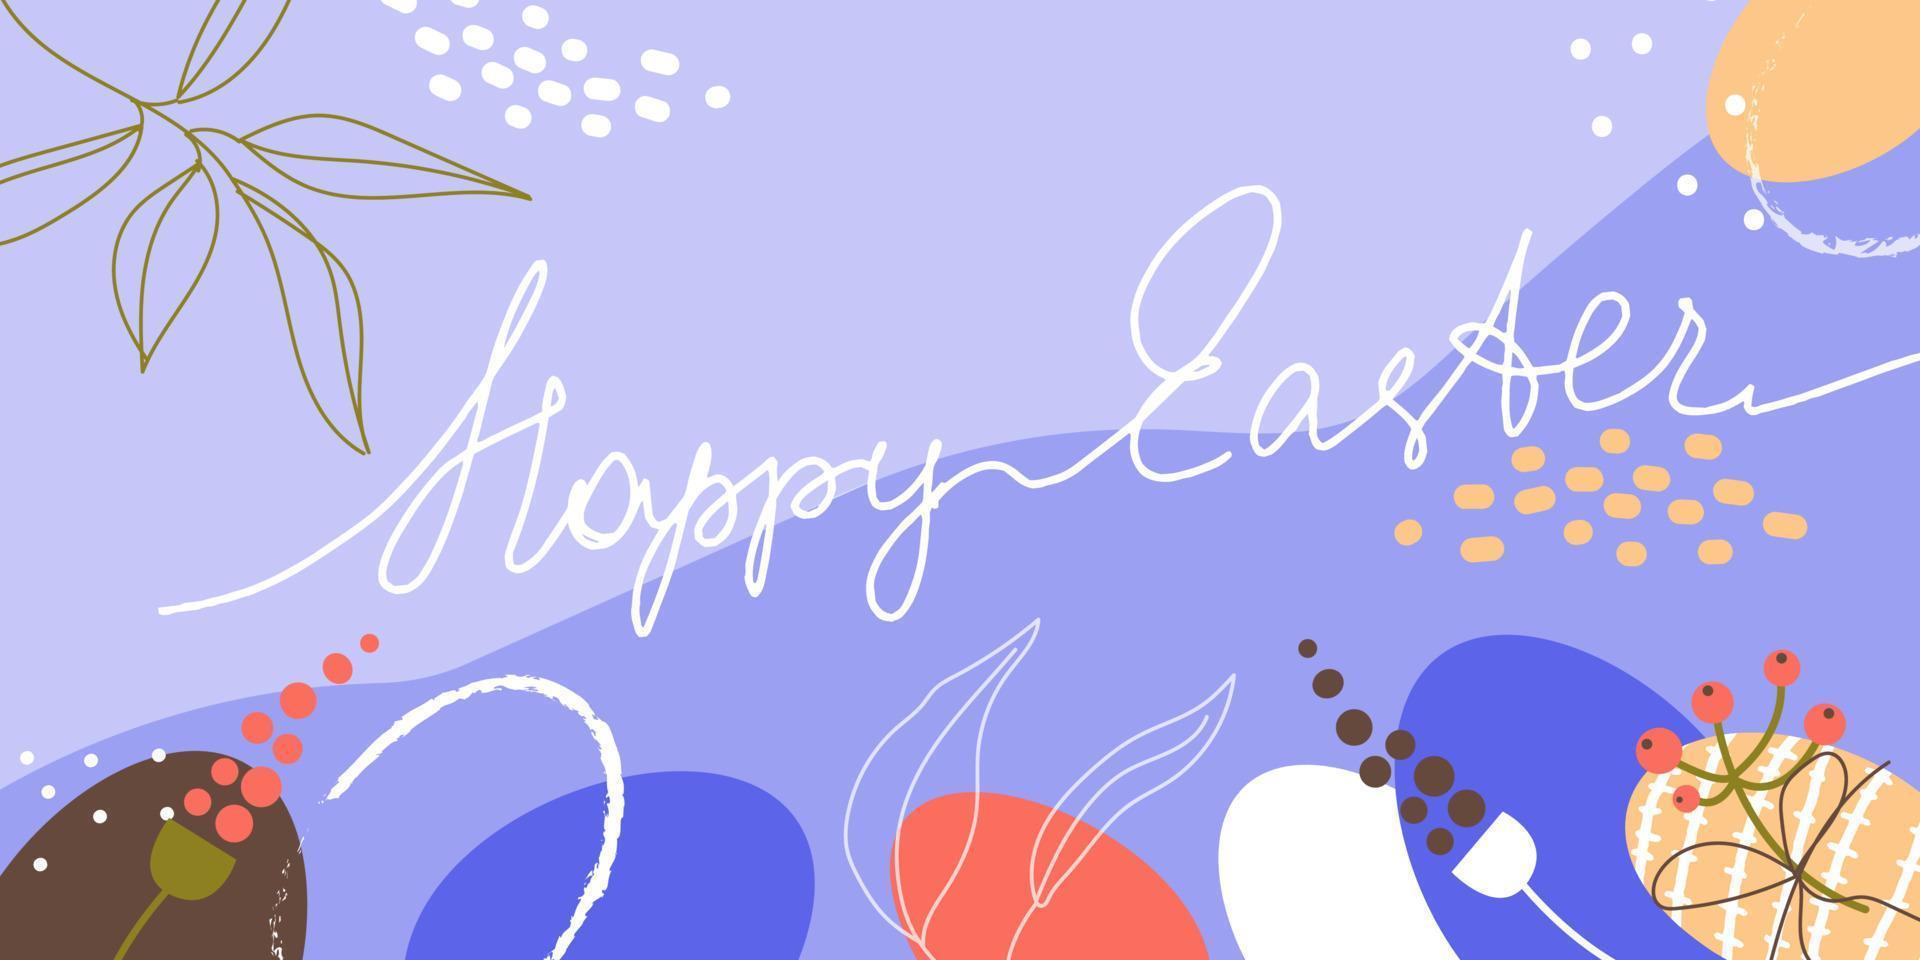 Happy easter banner background. Modern Easter design with handwritten text, abstract eggs, flowers and leaves. Cute minimalist template for for greeting card, poster, web banner, typography. Vector